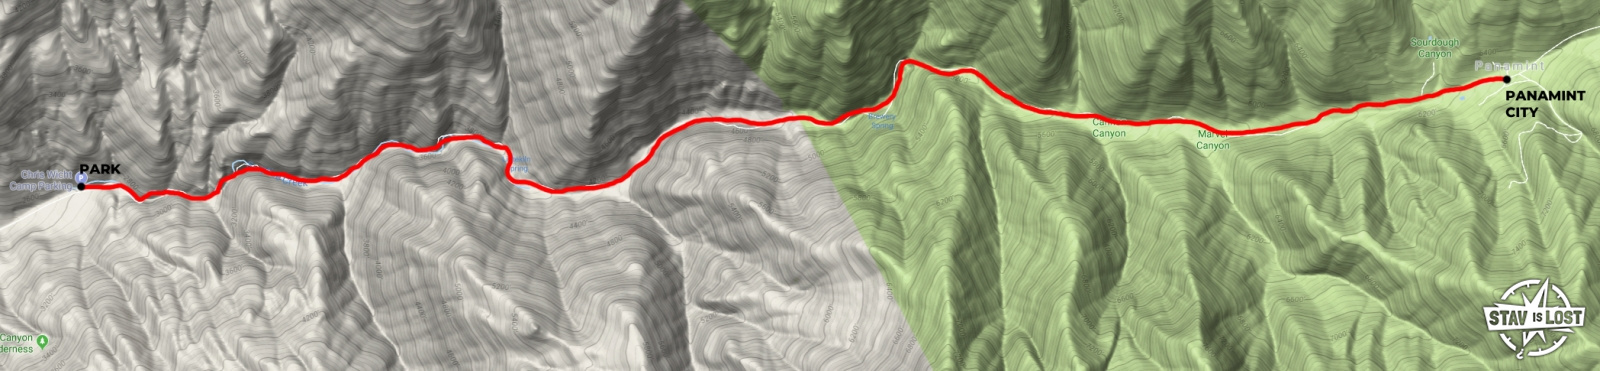 map for Panamint City via Surprise Canyon by stav is lost